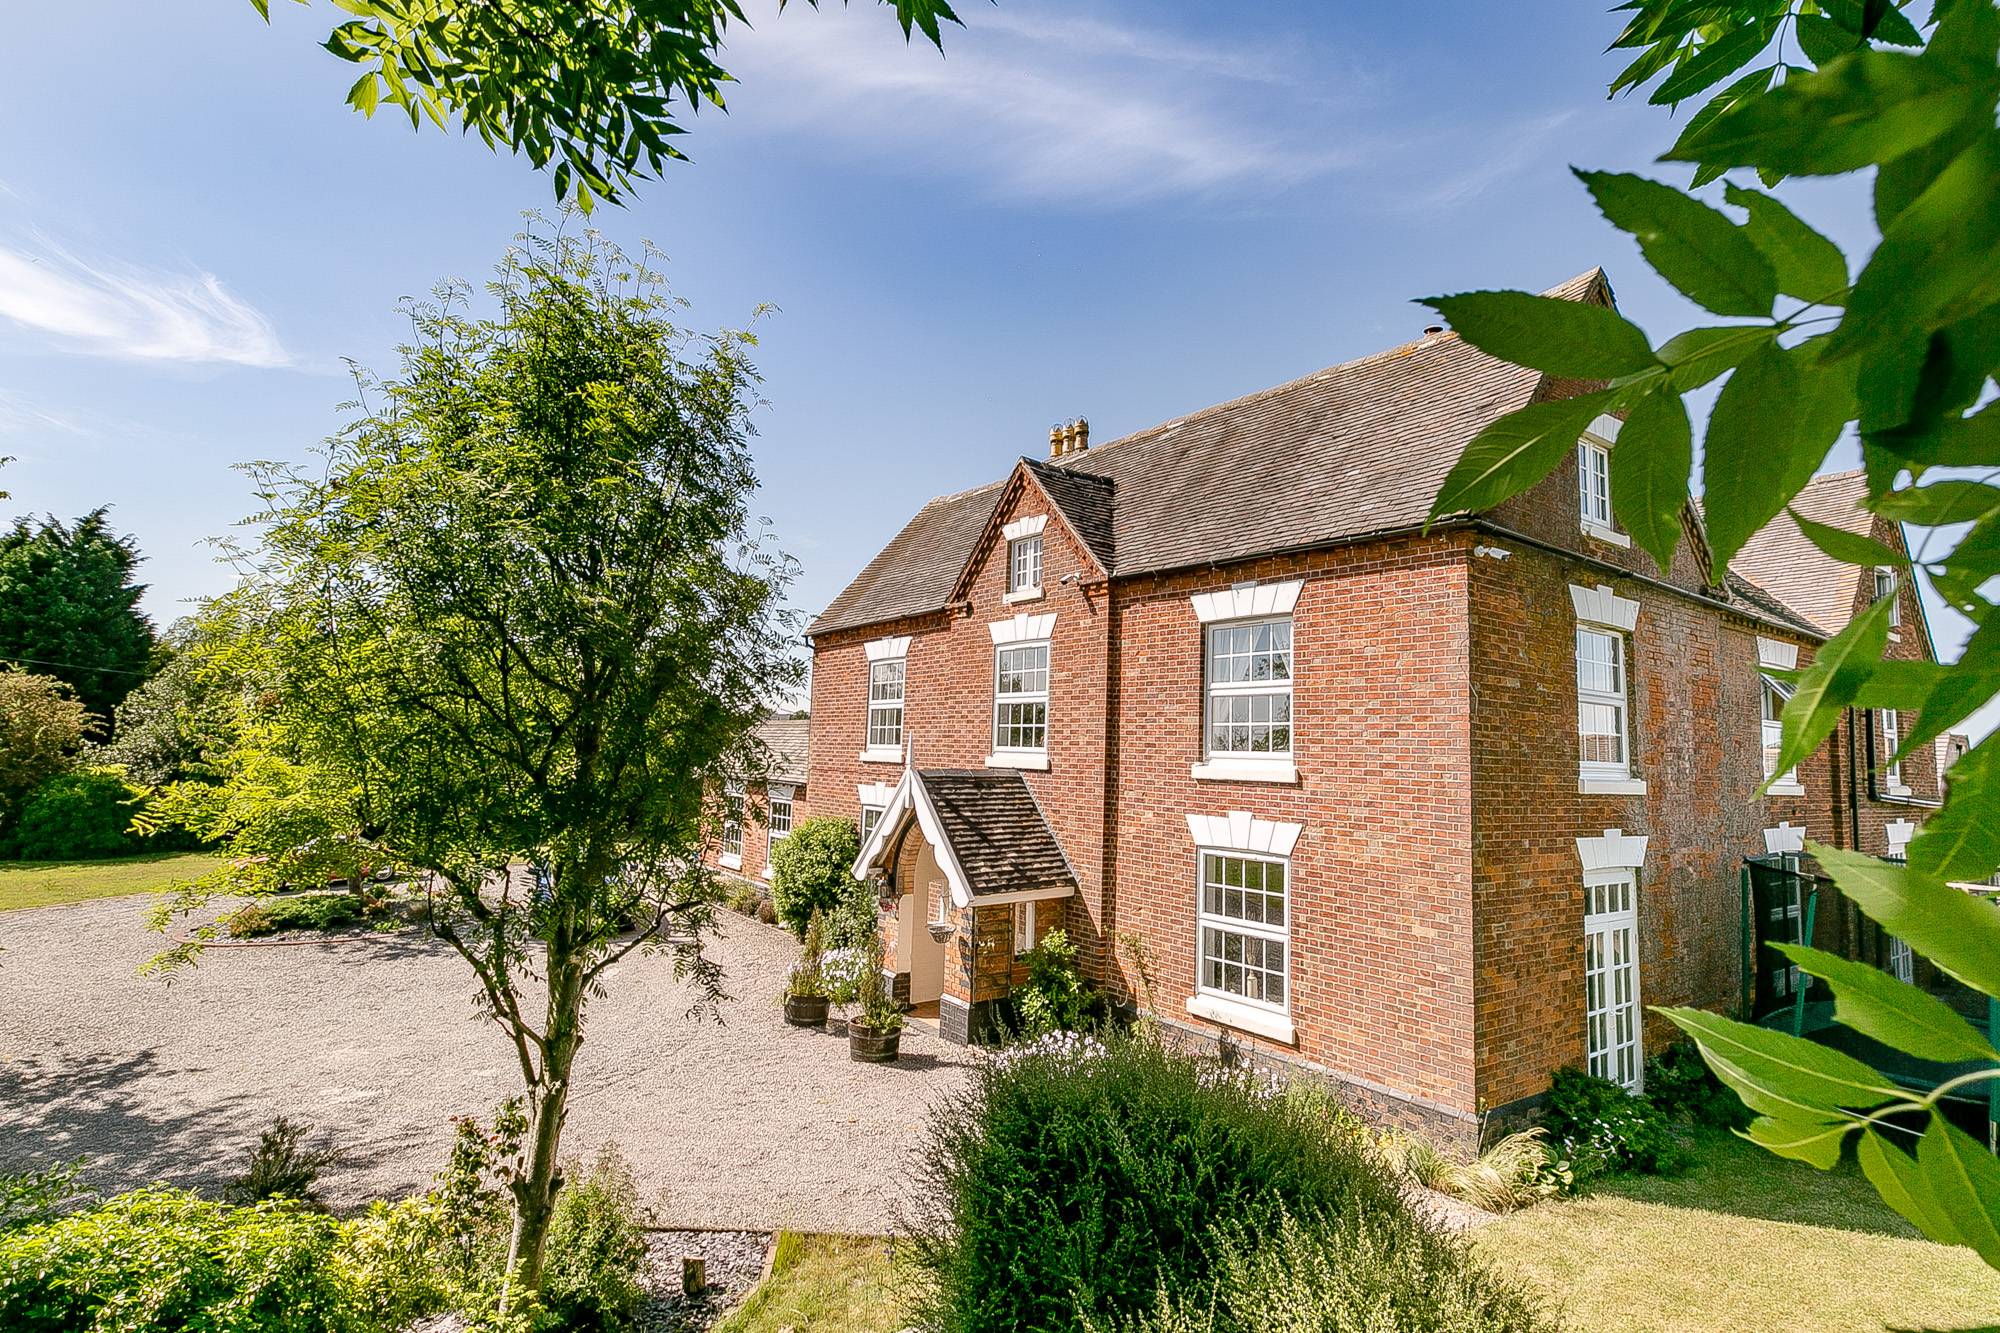 7 Bedroom Farm House - Church Farm is an exquisite, period property which boasts over 10,000sqft of luxurious living space. Nestled in one of Leicestershire's most exclusive villages, this home offers an endless opportunities not to be missed.